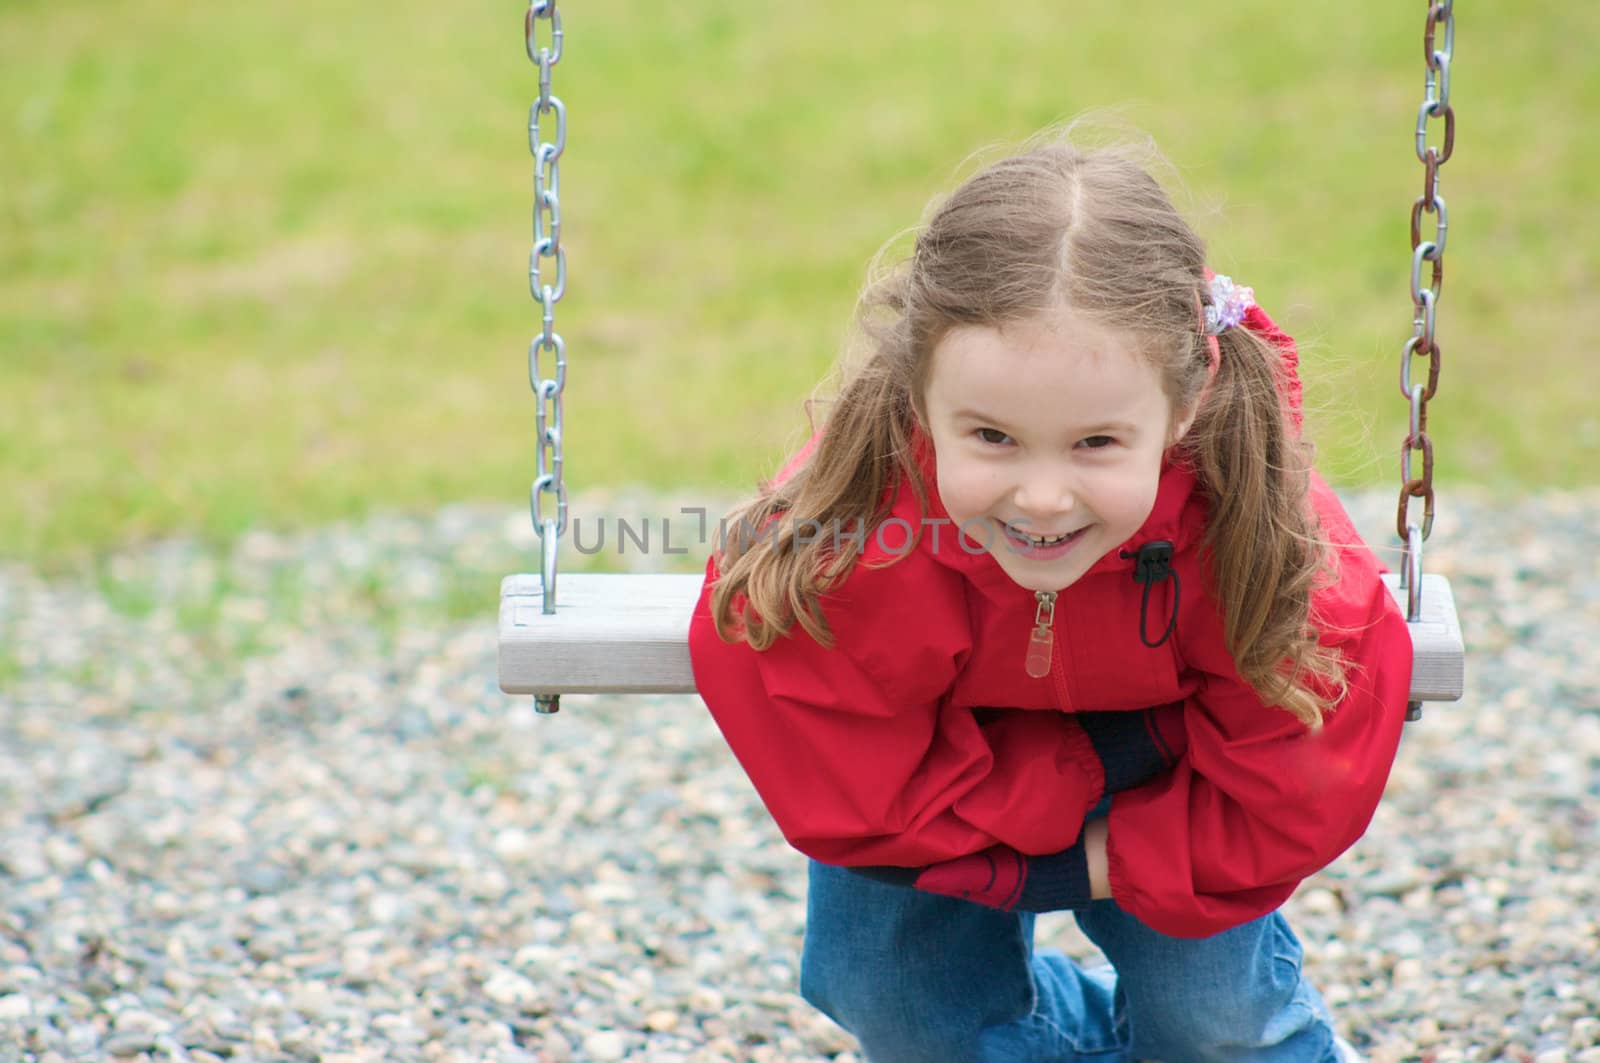 Little girl playing on a swing